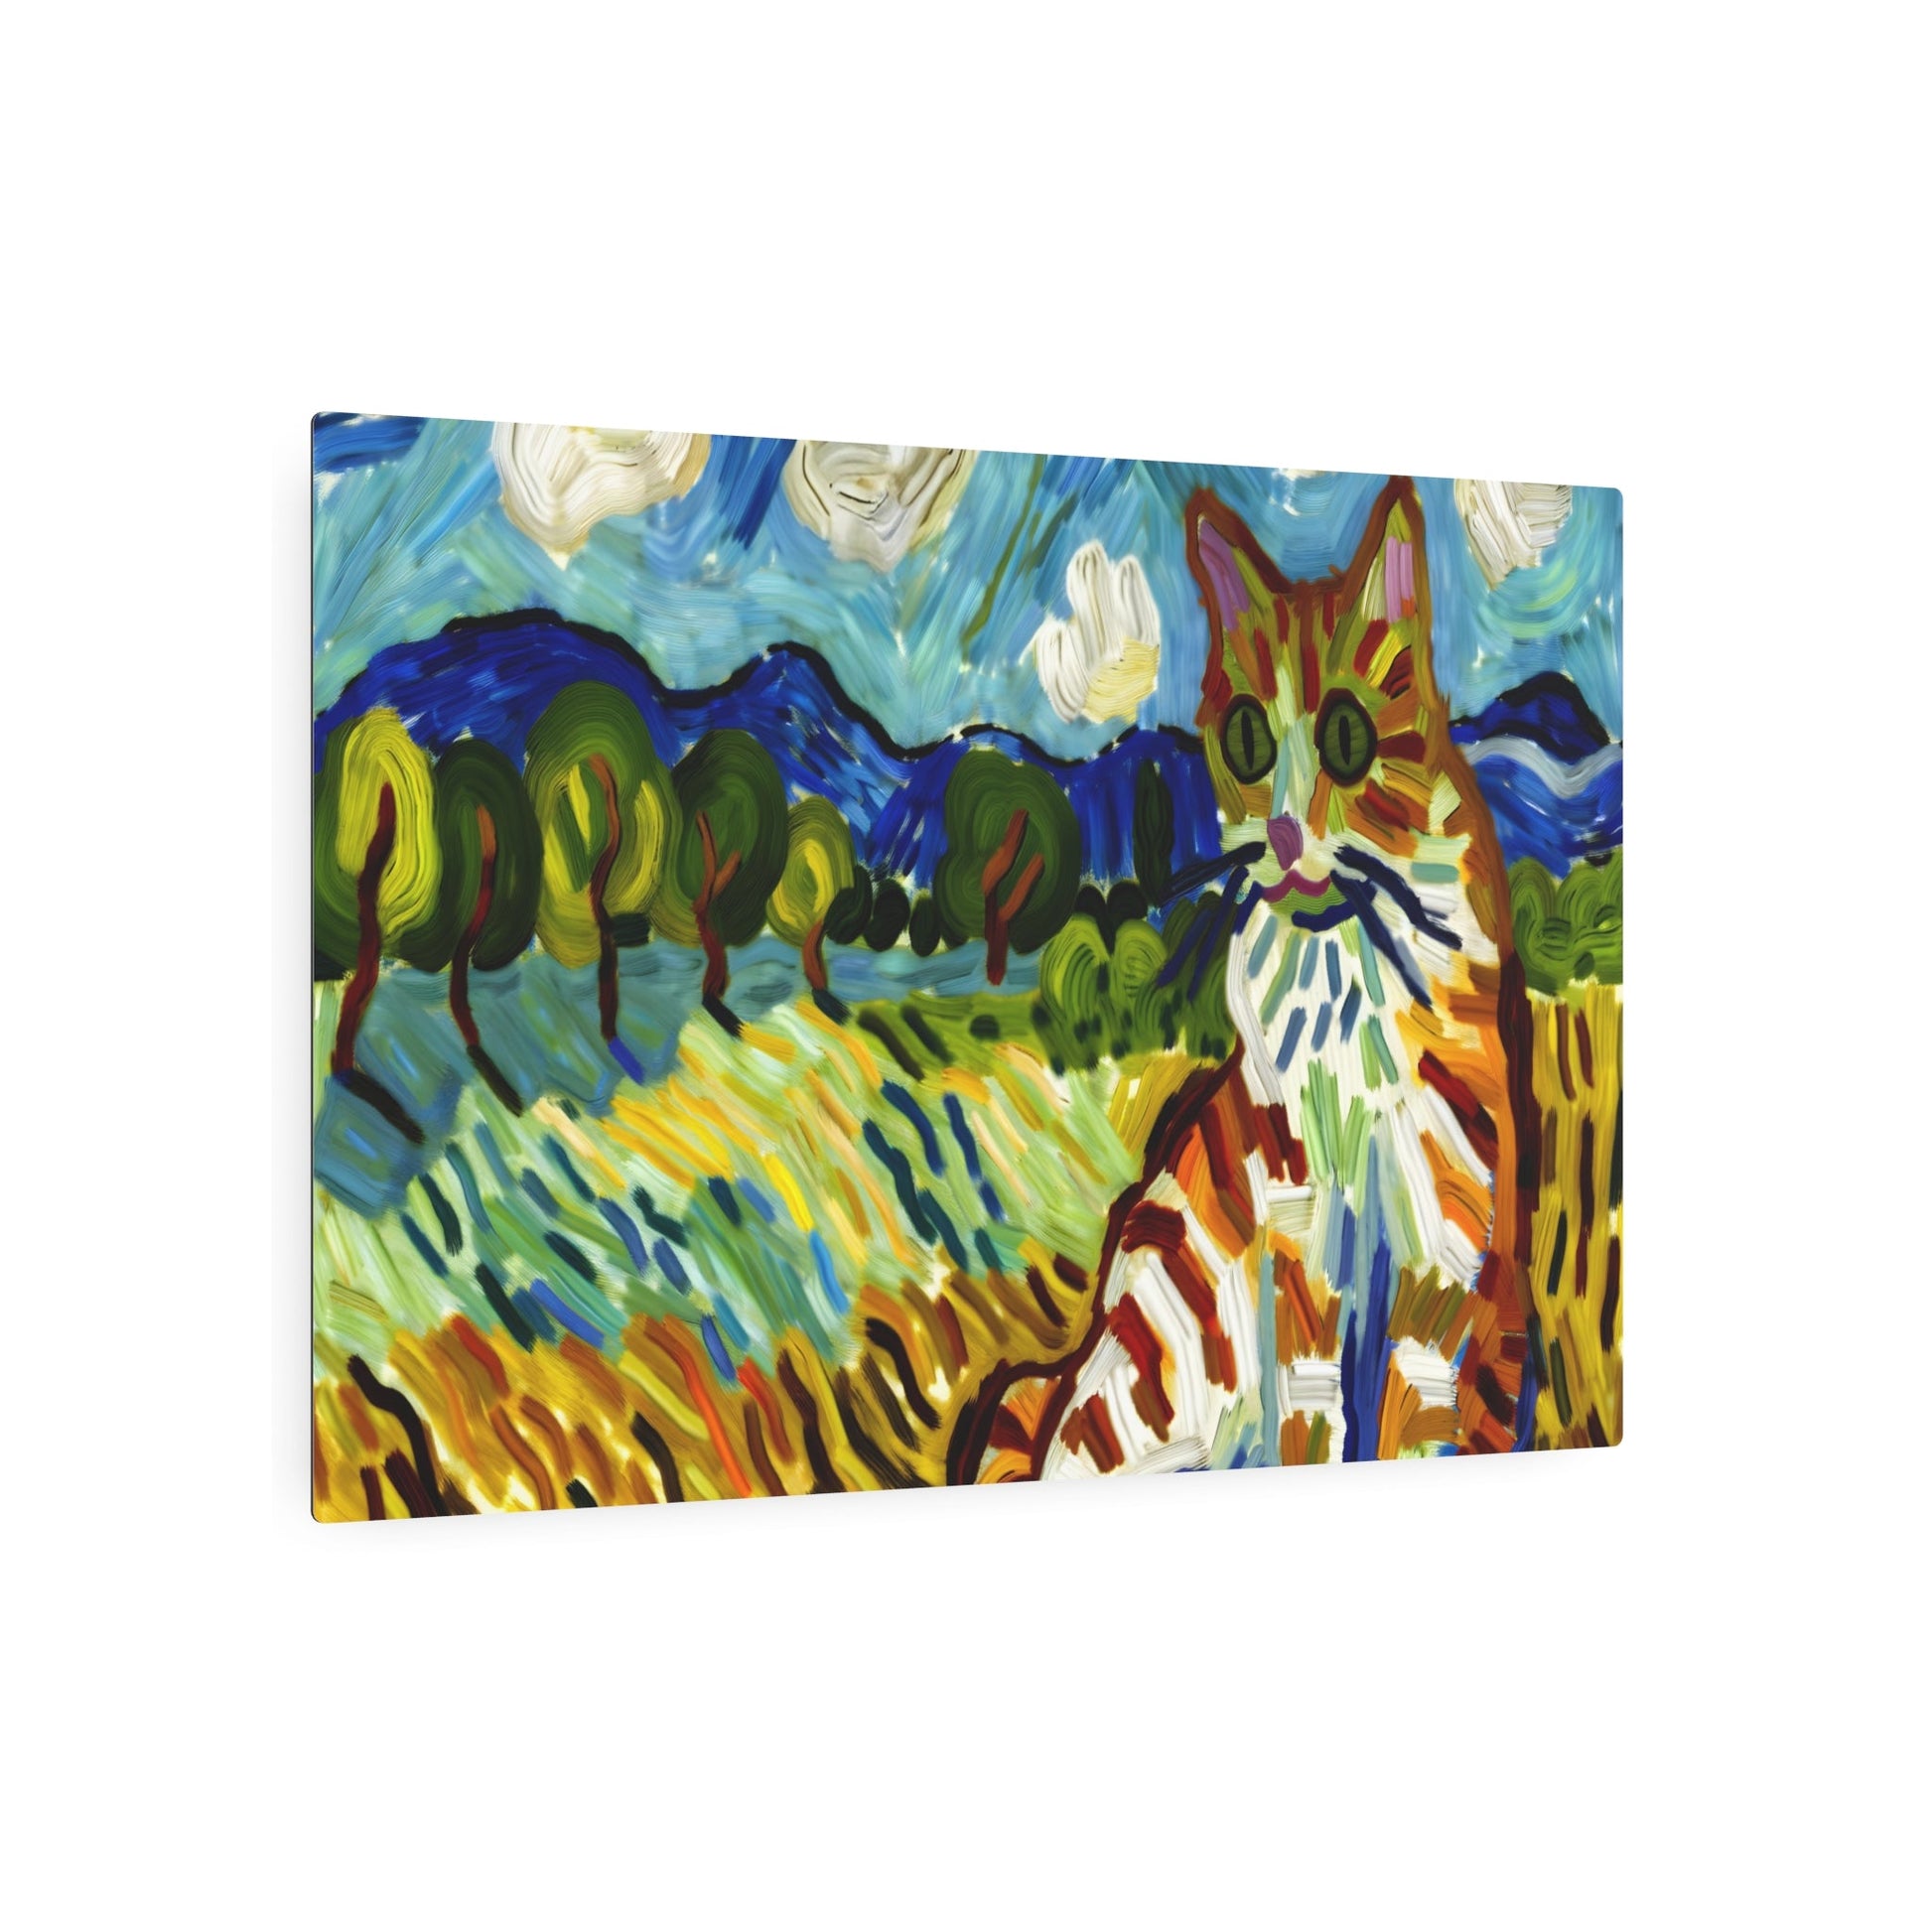 Metal Poster Art | "Post-Impressionism Inspired Colorful Cat Landscape - Western Art Styles Collection" - Metal Poster Art 36″ x 24″ (Horizontal) 0.12''